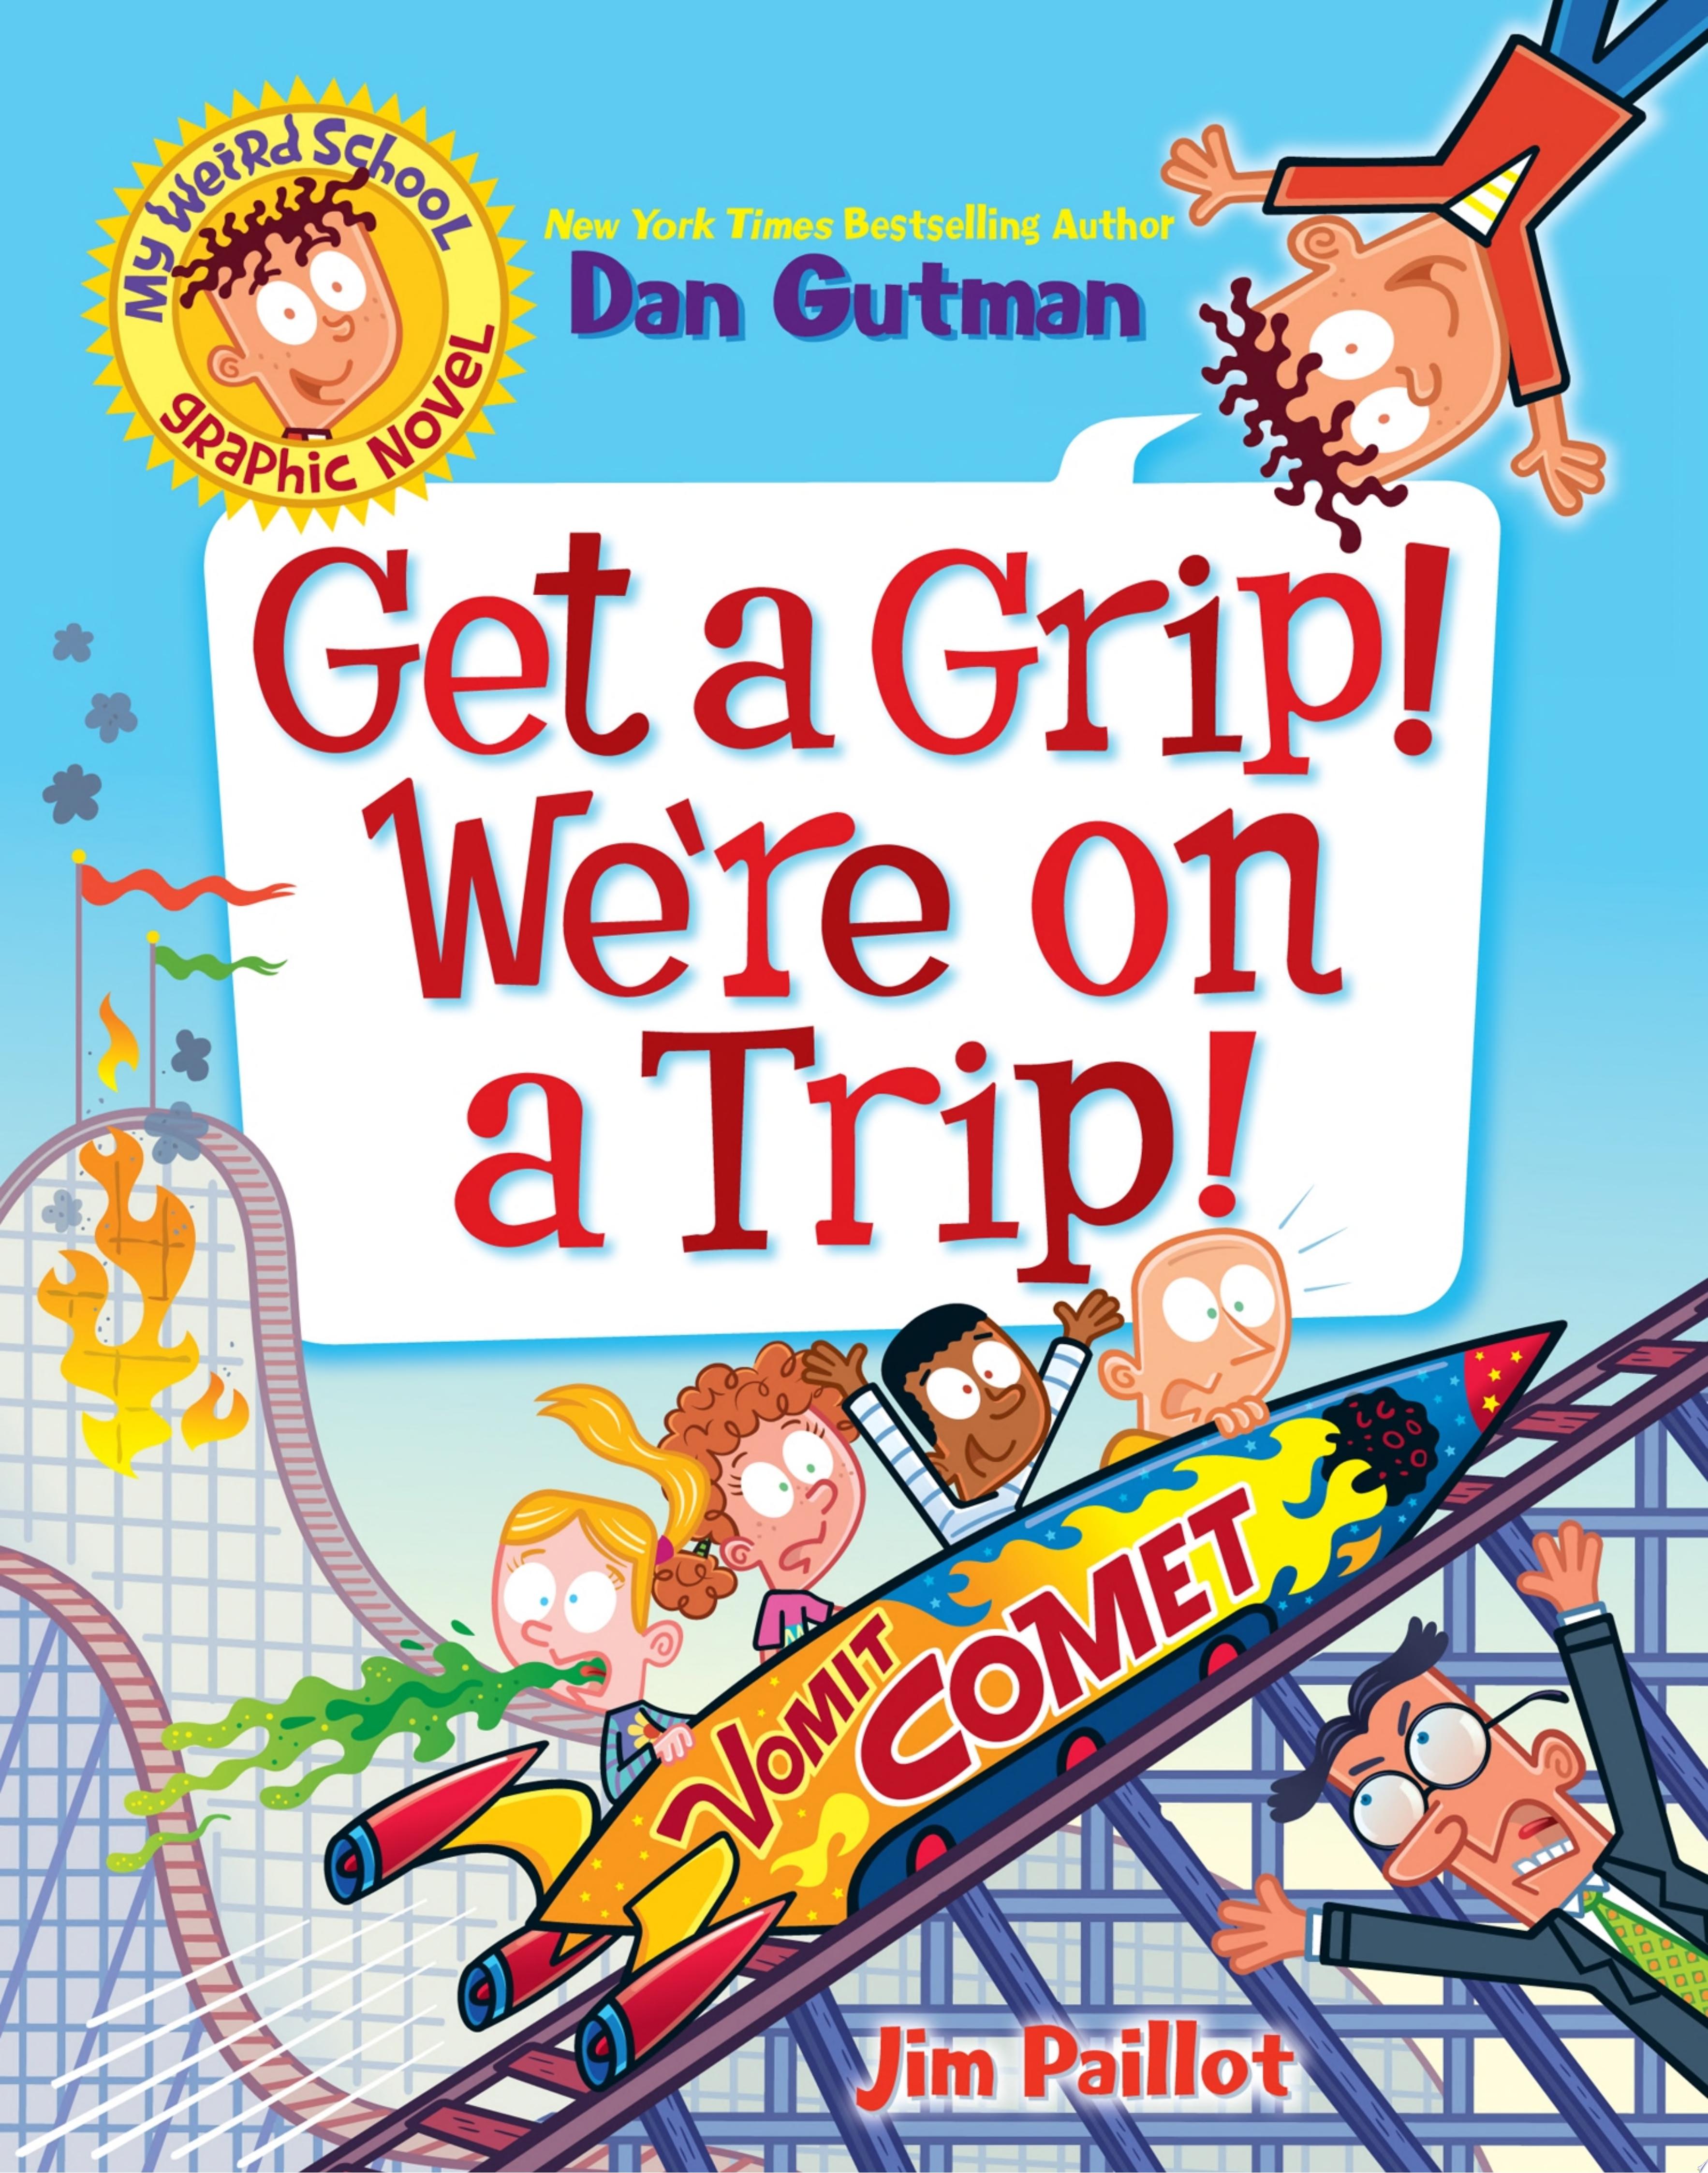 Image for "My Weird School Graphic Novel: Get a Grip! We're on a Trip!"